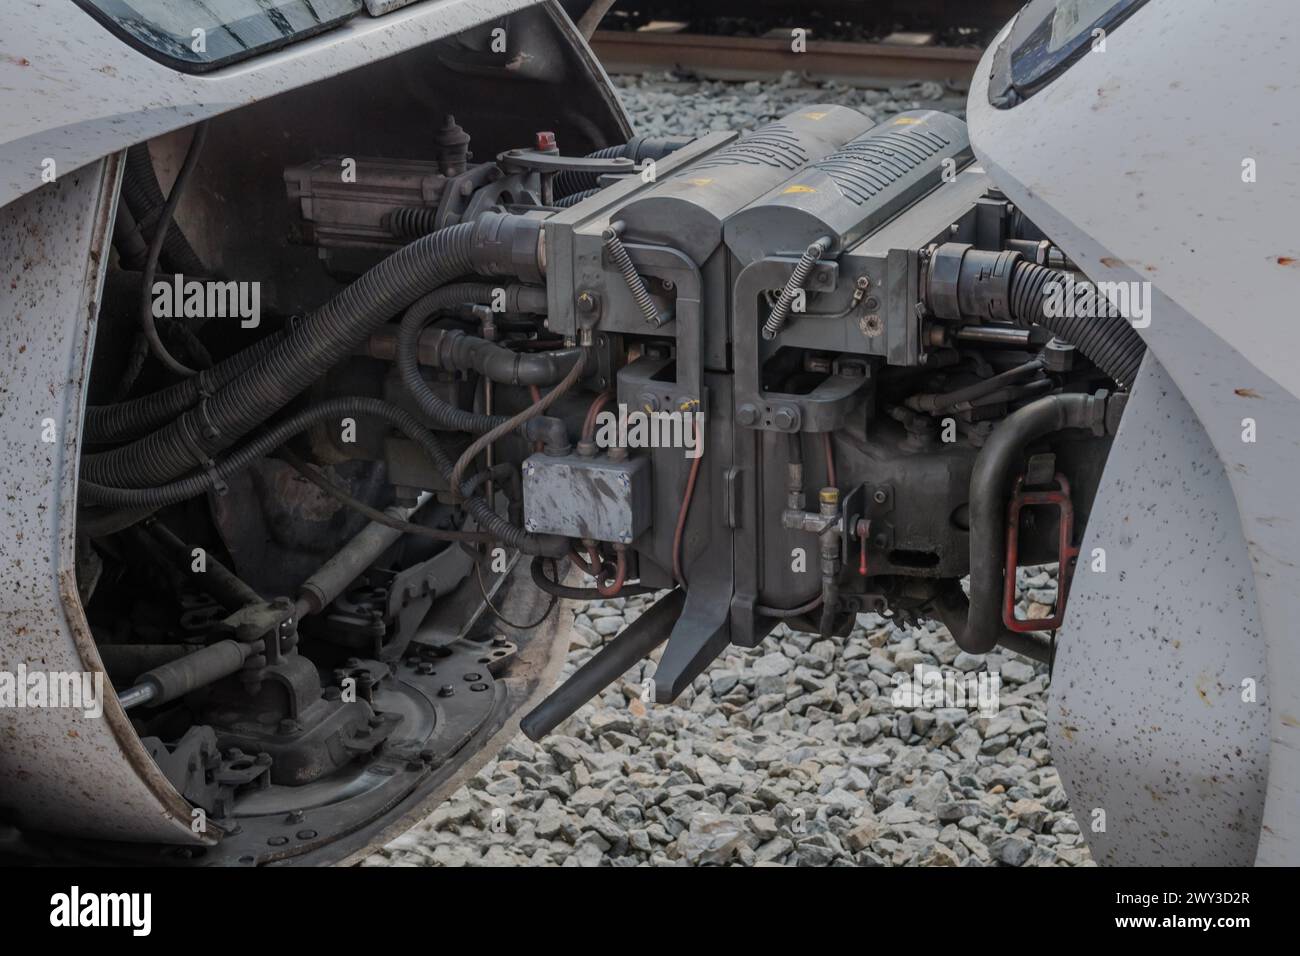 Complex machinery and hoses visible on a train engine's underside, in South Korea Stock Photo